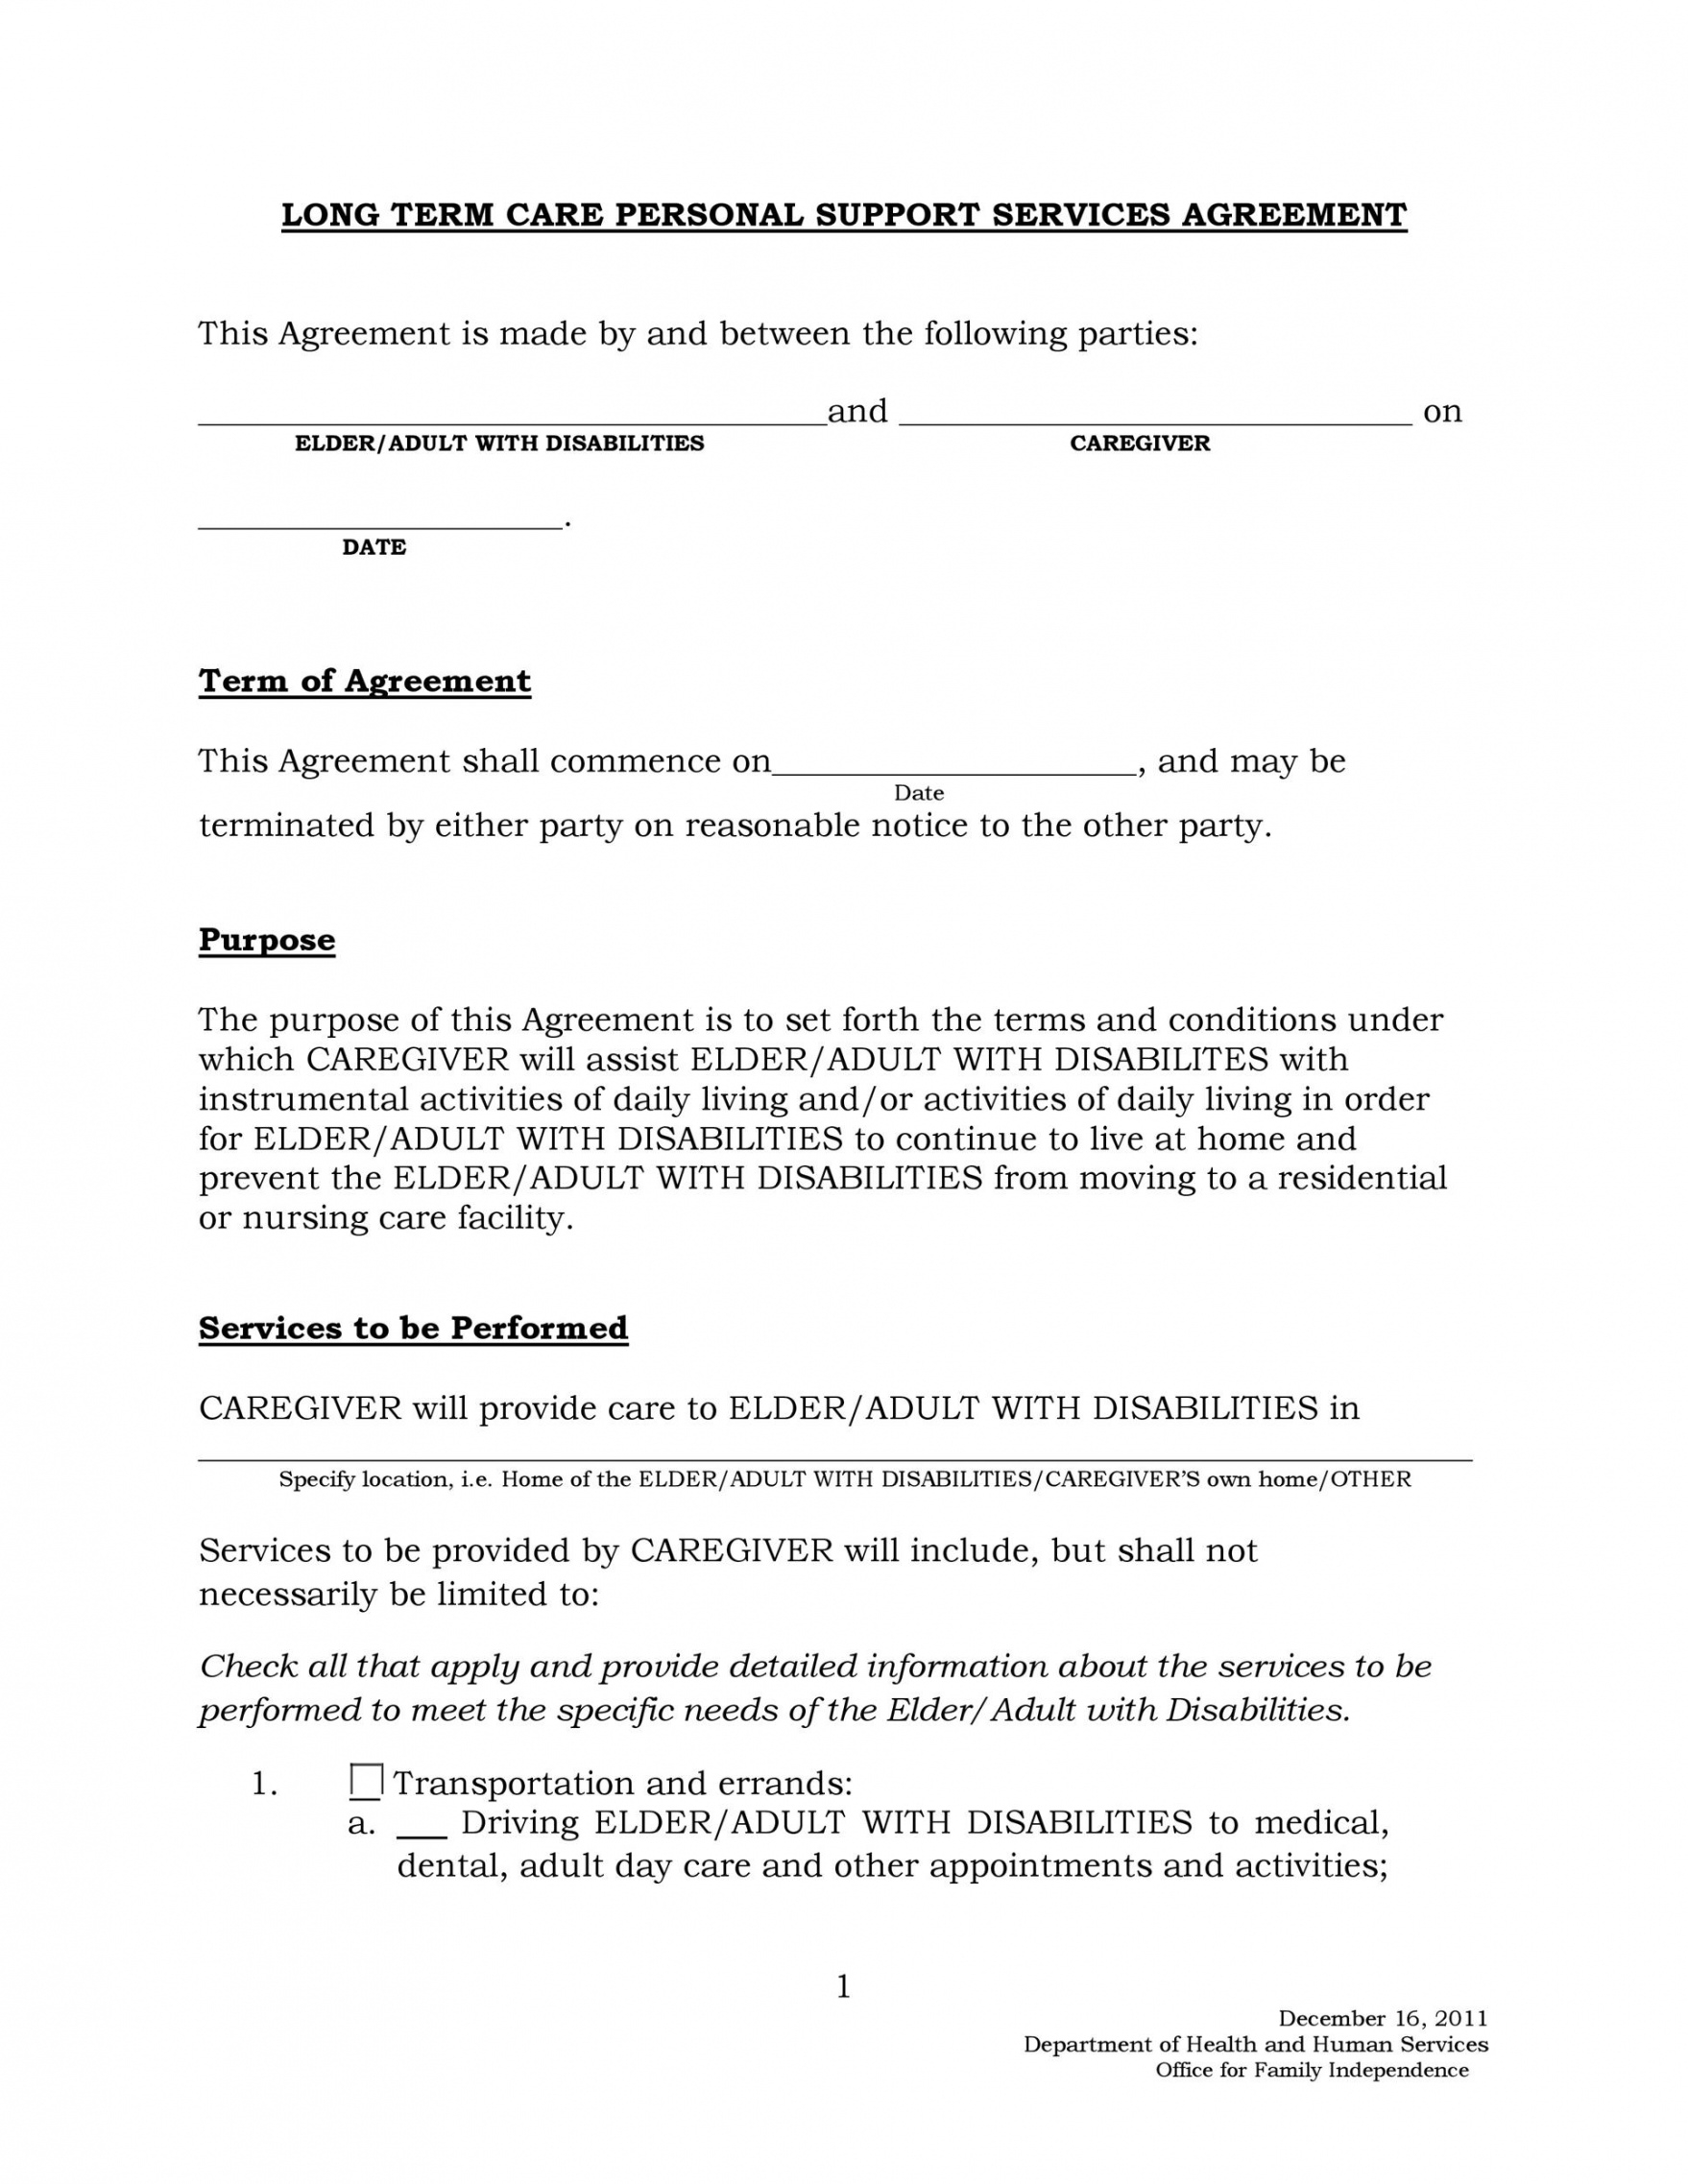 free 50 professional service agreement templates &amp; contracts long term service agreement template example